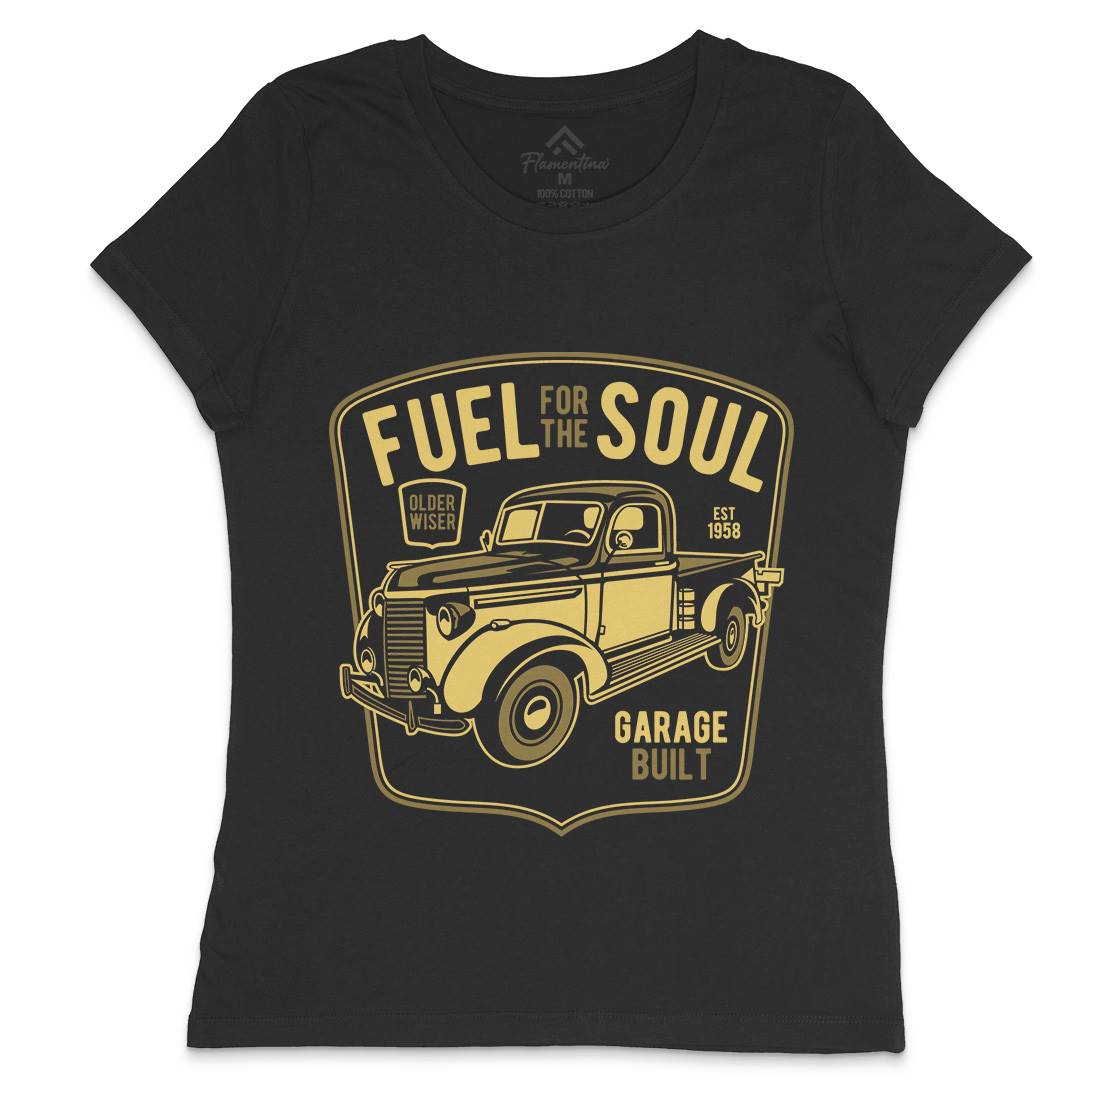 Fuel For The Soul Womens Crew Neck T-Shirt Cars B213